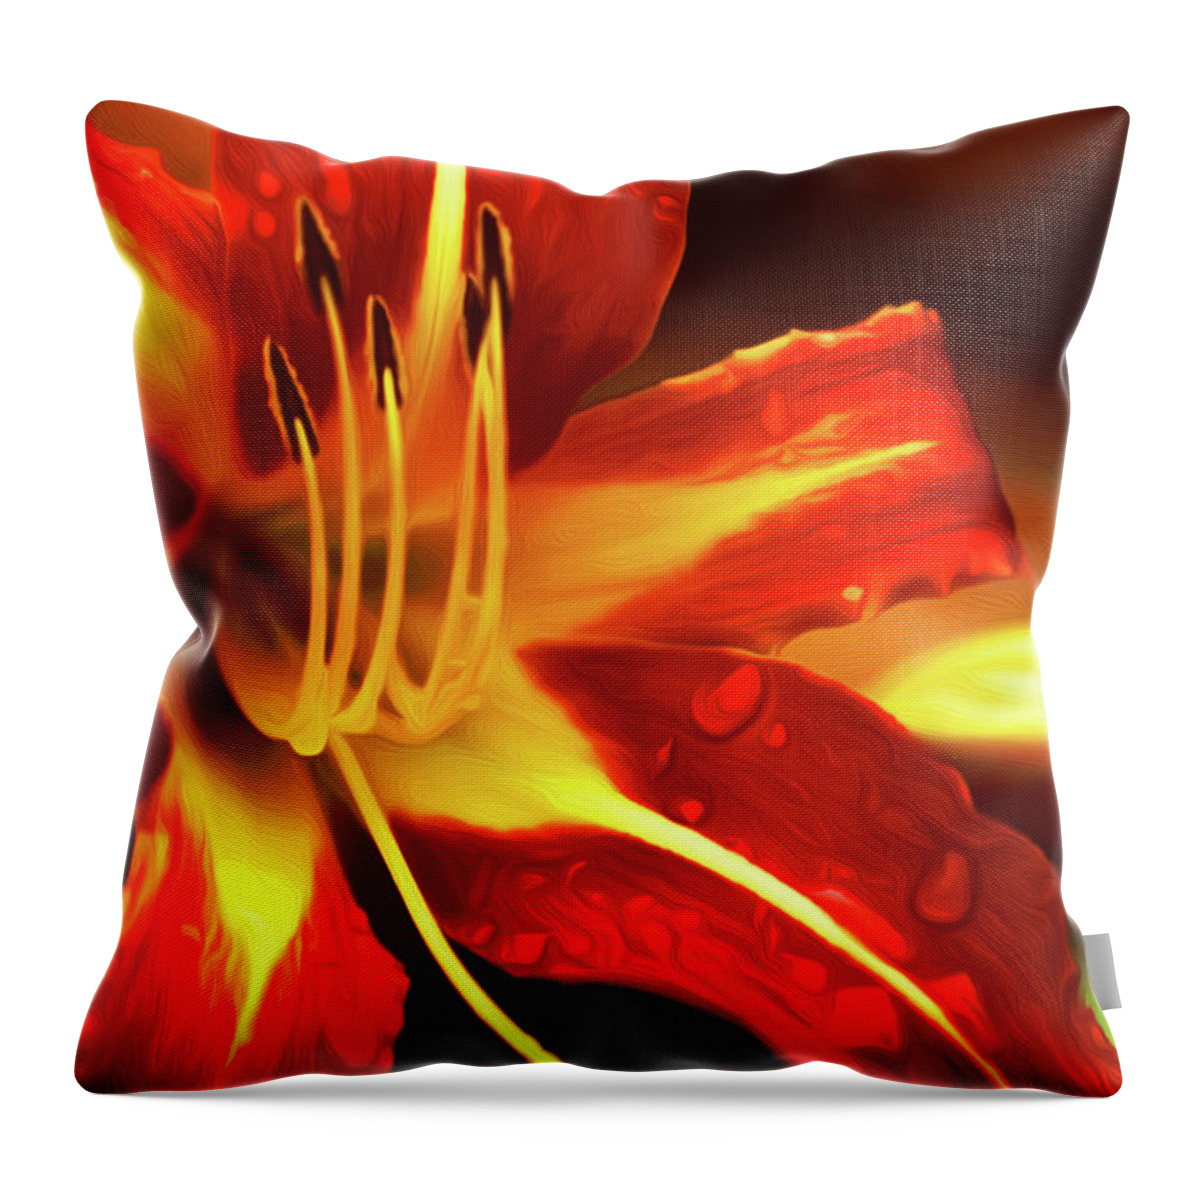 Orange Throw Pillow featuring the painting Orange Flower #4 by Prince Andre Faubert